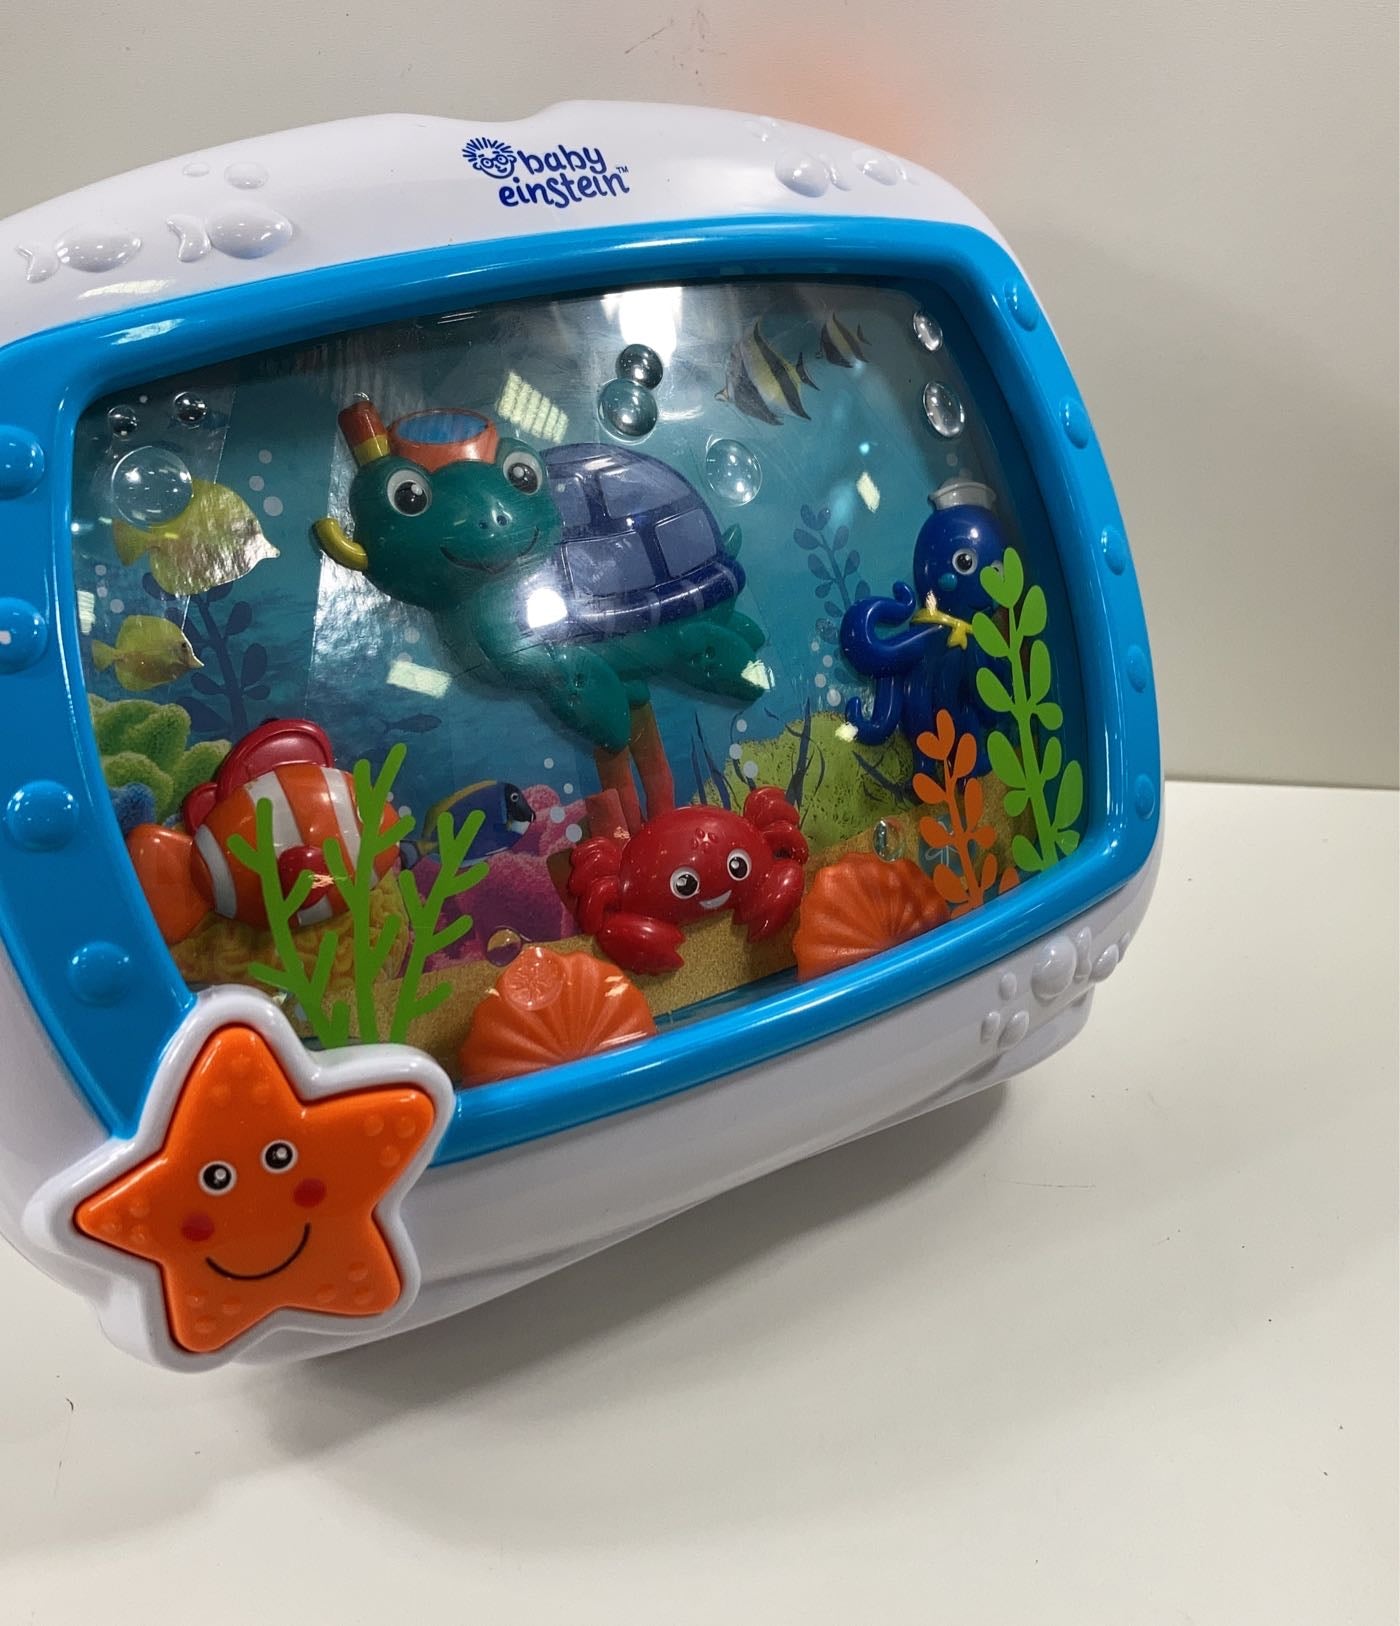 Baby Einstein Sea Dreams Soother … curated on LTK